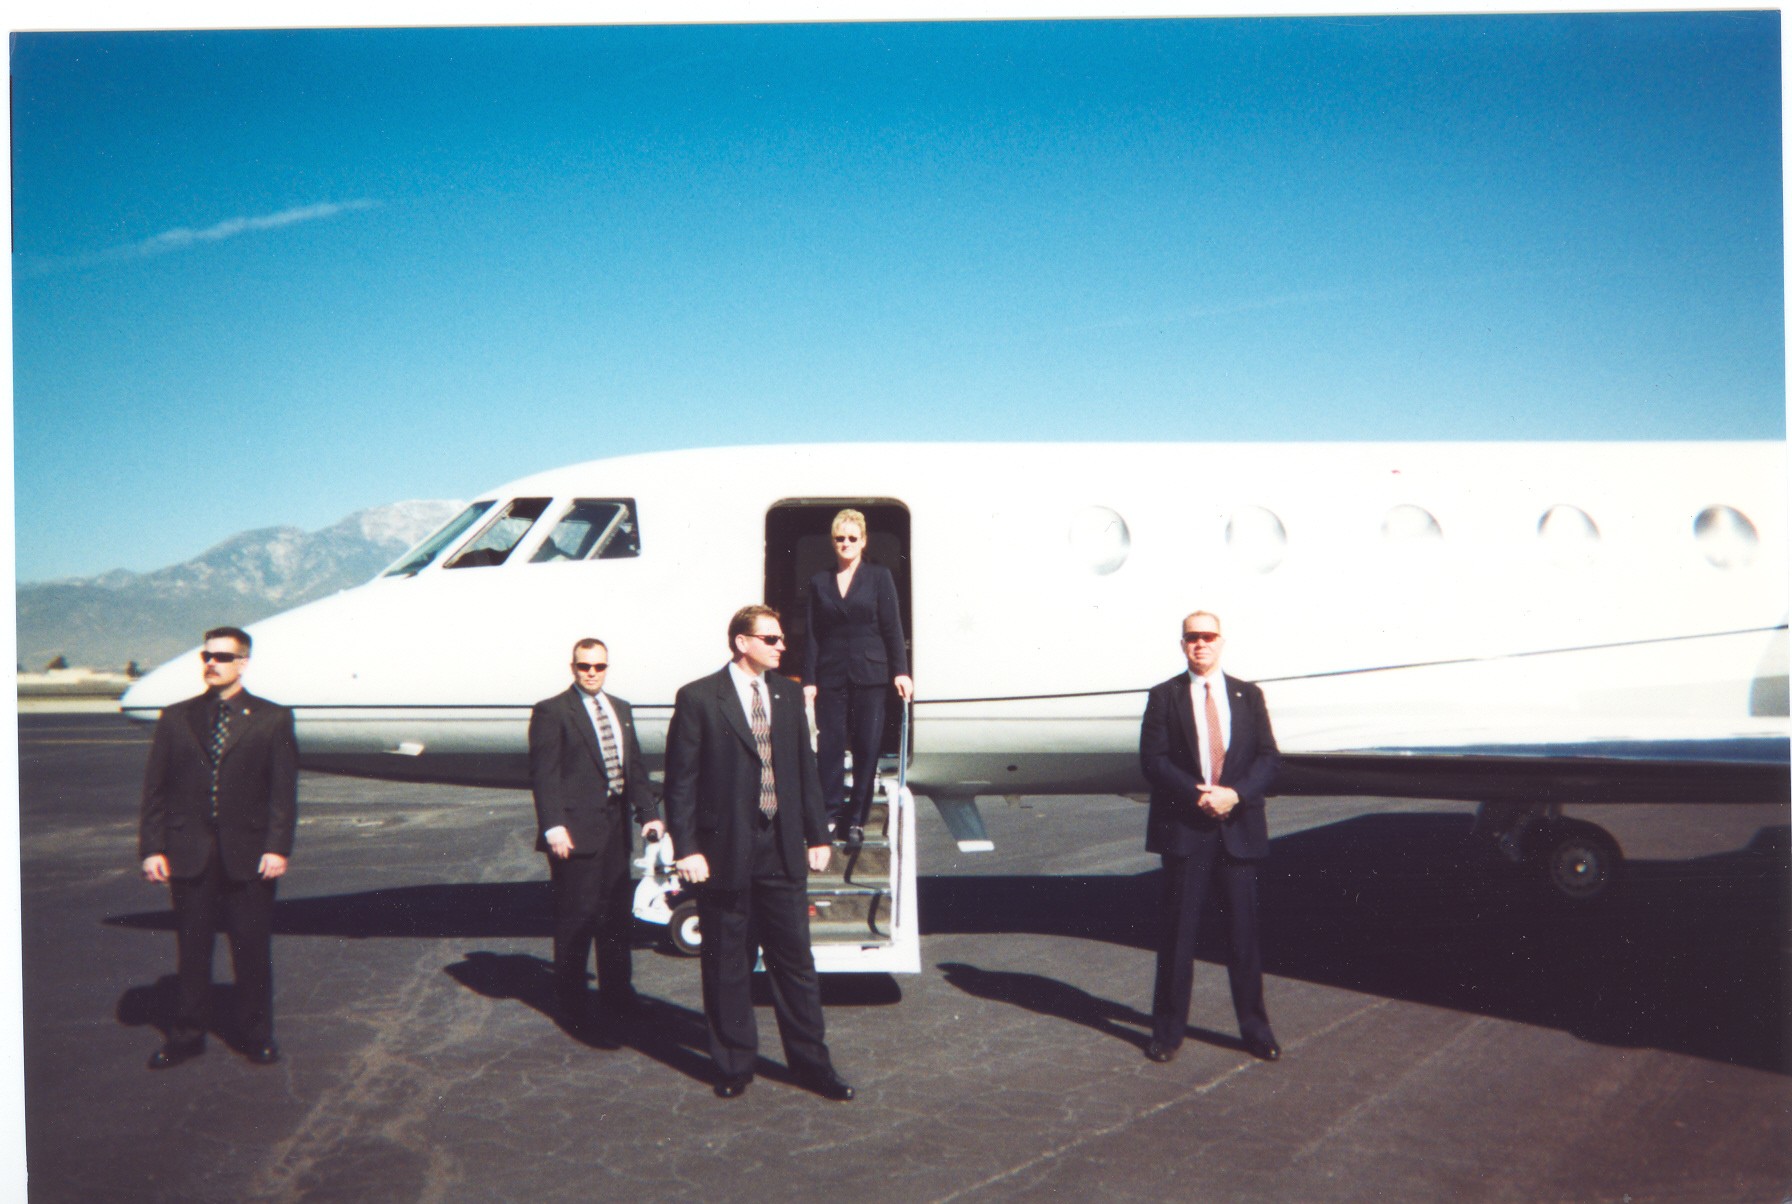 Jim, and his team, protecting a principal coming off of a private jet, which requires knowing the aviation enviornment and Executive Protection.